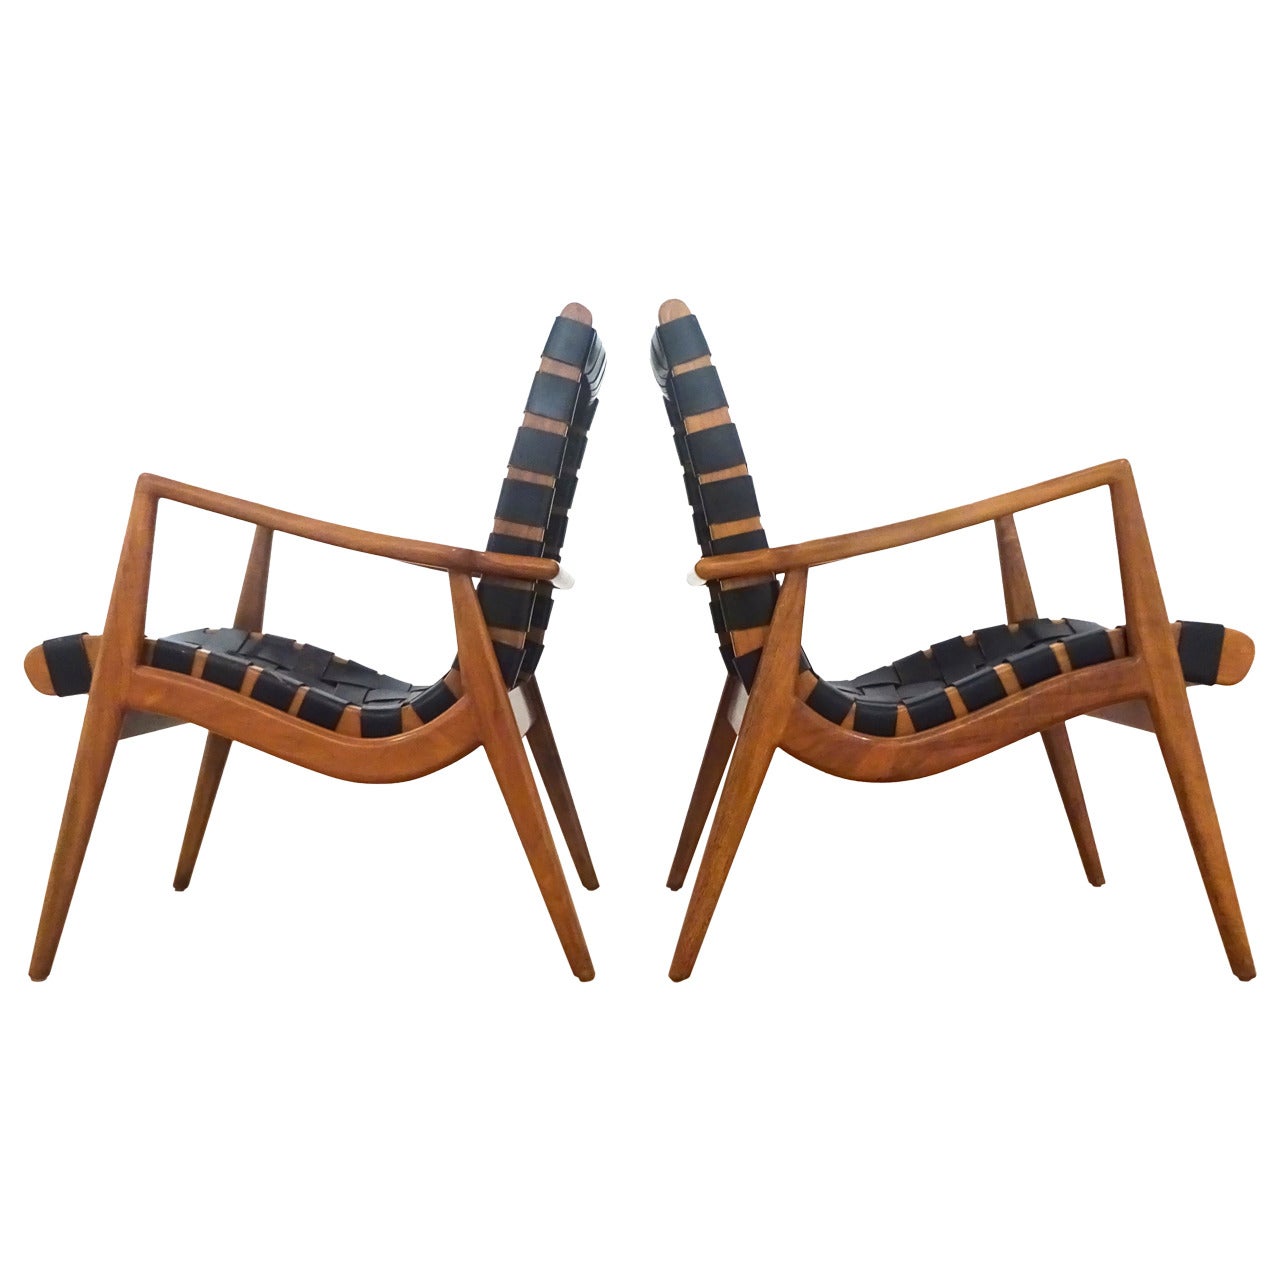 Sculptural Pair of 1950s Mel Smilow Walnut and Leather Lounge Chairs For Sale